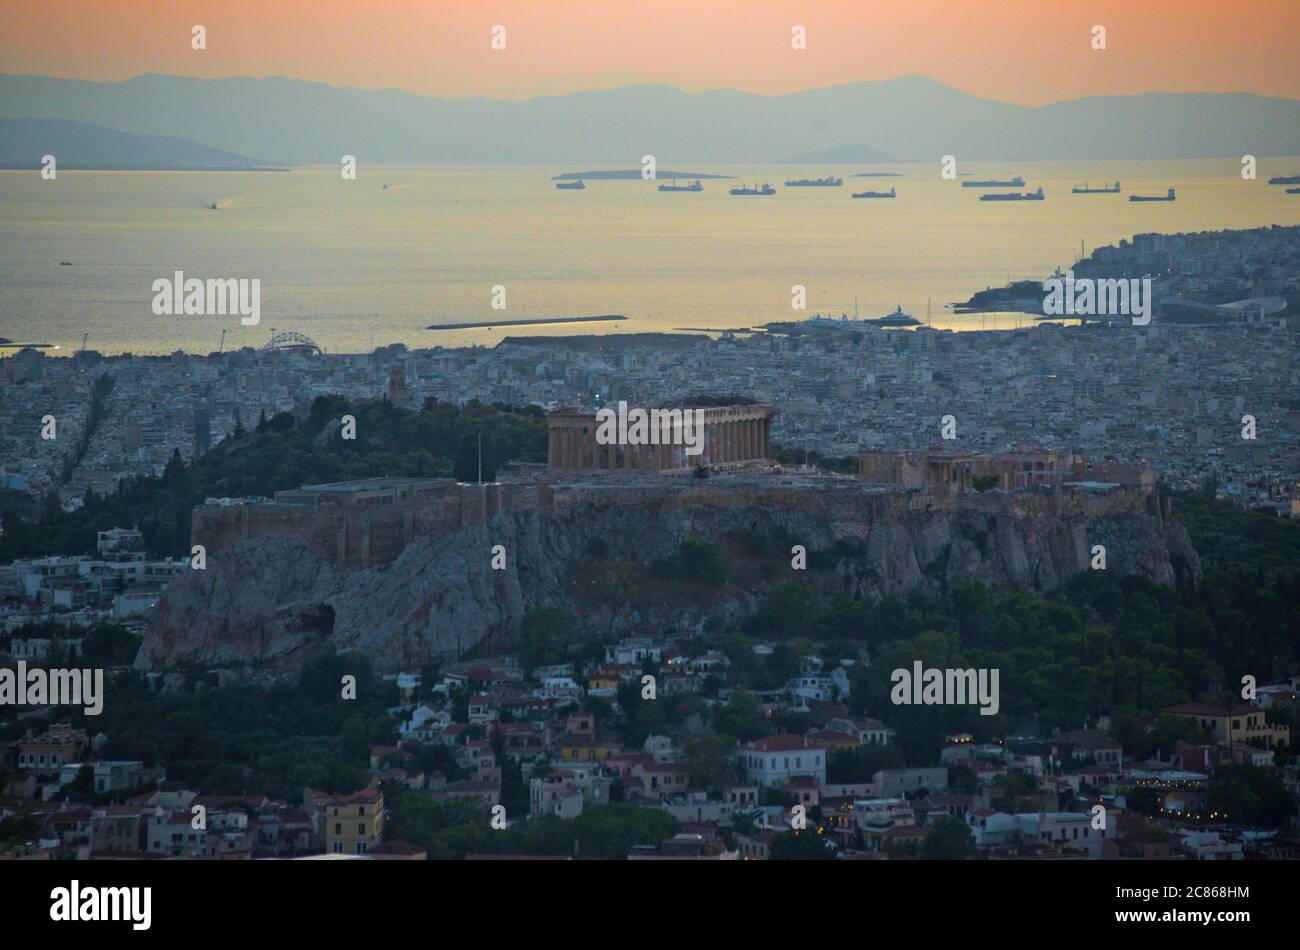 Sunset in Athens, view from Lycabettus Mountain with the Acropolis and the Parthenon at twilight. Greece Stock Photo